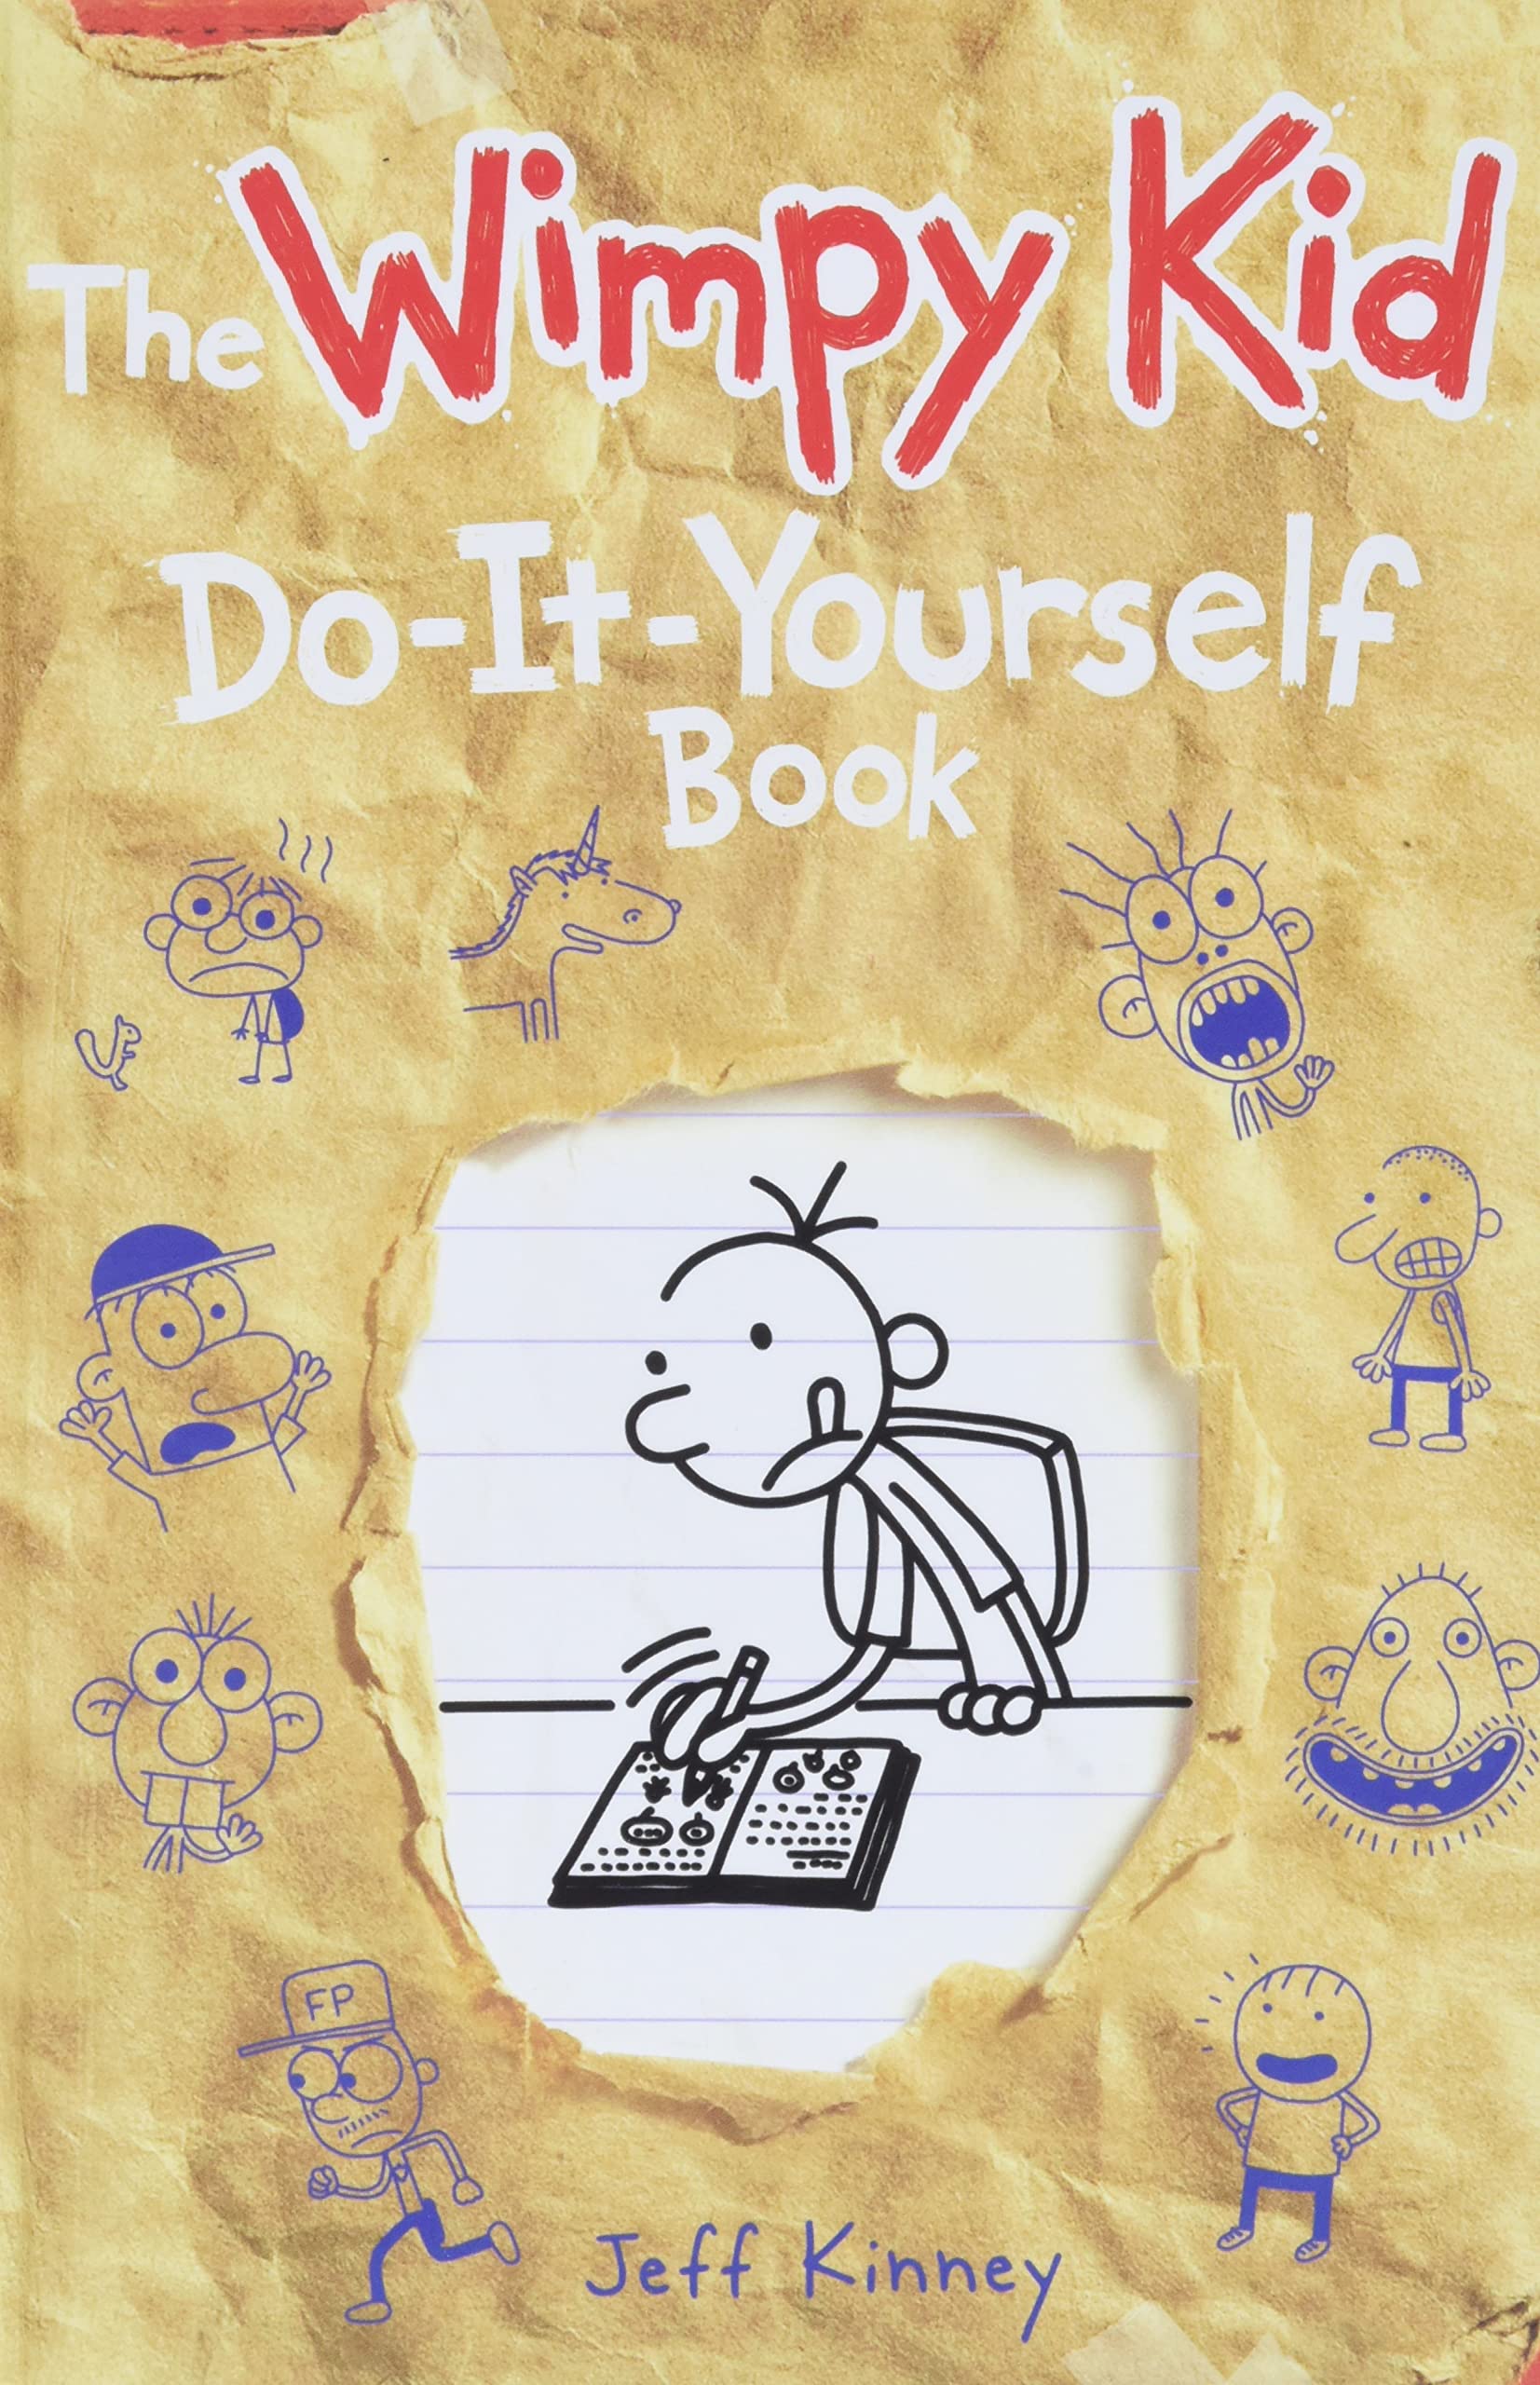 The Wimpy Kid Do-It-Yourself Book - Diary of a Wimpy Kid Wiki